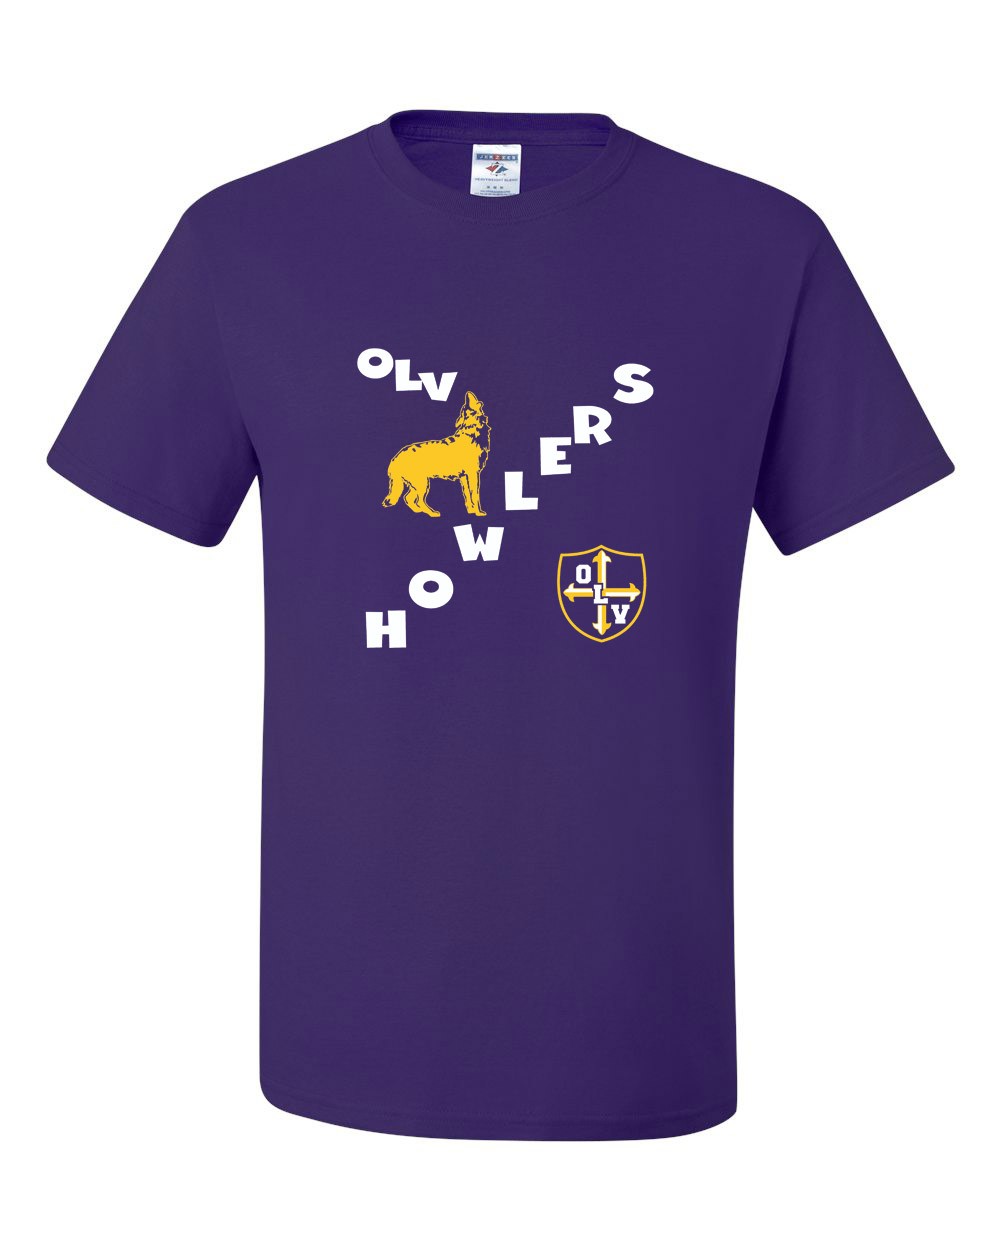 OLV S/S Spirit T-Shirt w/ Howler Logo - Please Allow 2-3 Weeks for Delivery